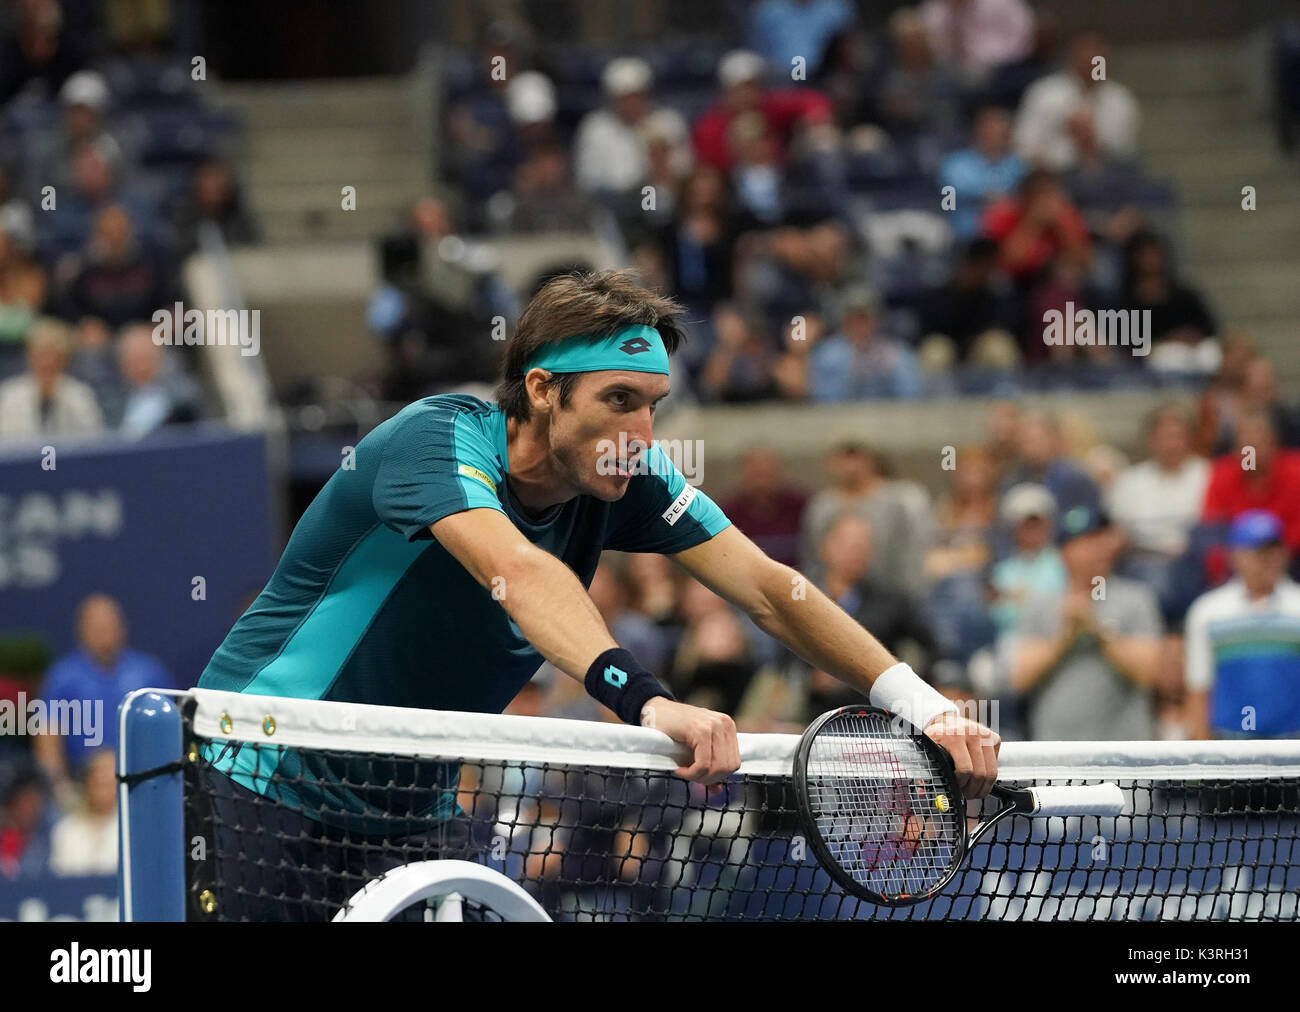 New York, Ny Usa. 2nd Sep, 2017. Leonardo Mayer of Argentina reacts during match against Rafael N adal of Spain during US Open Championships 2017 at Billie Jean King National Tennis Center Credit: Lev Radin/Pacific Press/Alamy Live News Stock Photo